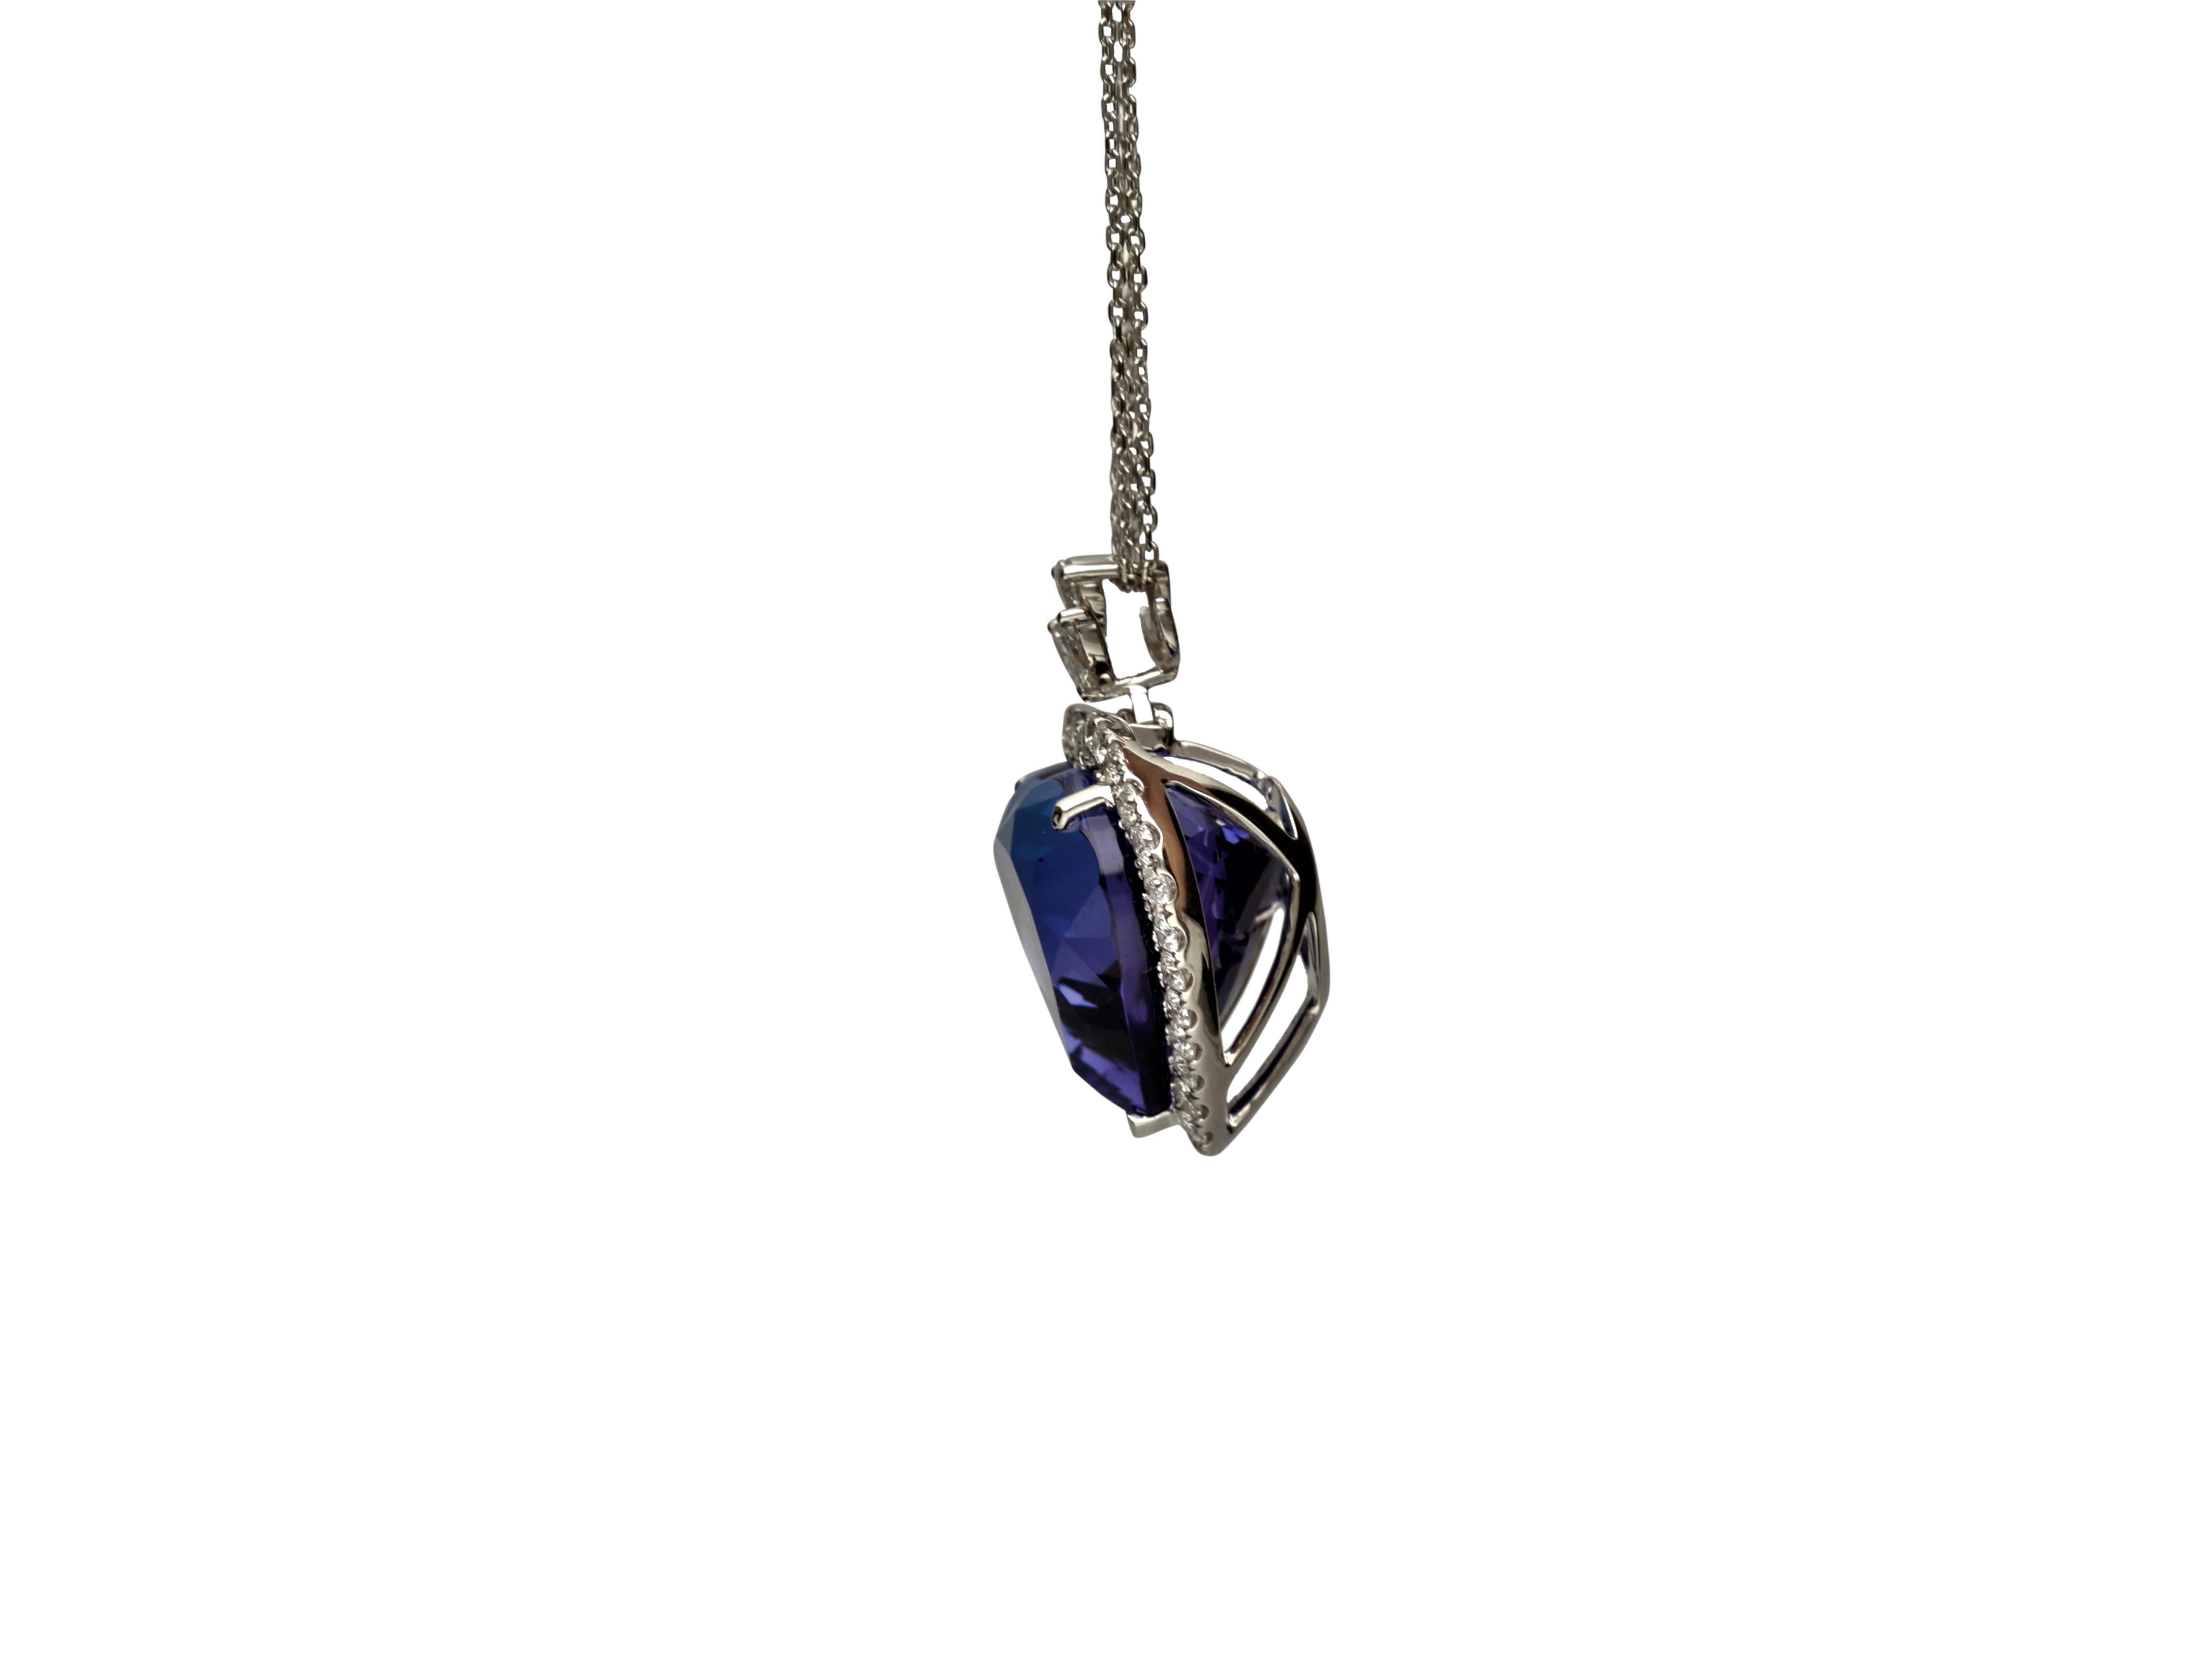 This beautiful Heart Necklace is crafted in 18-karat White gold. It features a 19 mm Heart Shaped Tanzanite 31.83 Carat, 2 Marquise Diamonds 0.29 ct., 1 Pear Shape Diamond 0.18 Carat GH-SI quality, and surrounded by 30 Round Diamonds 1.04 Carat.